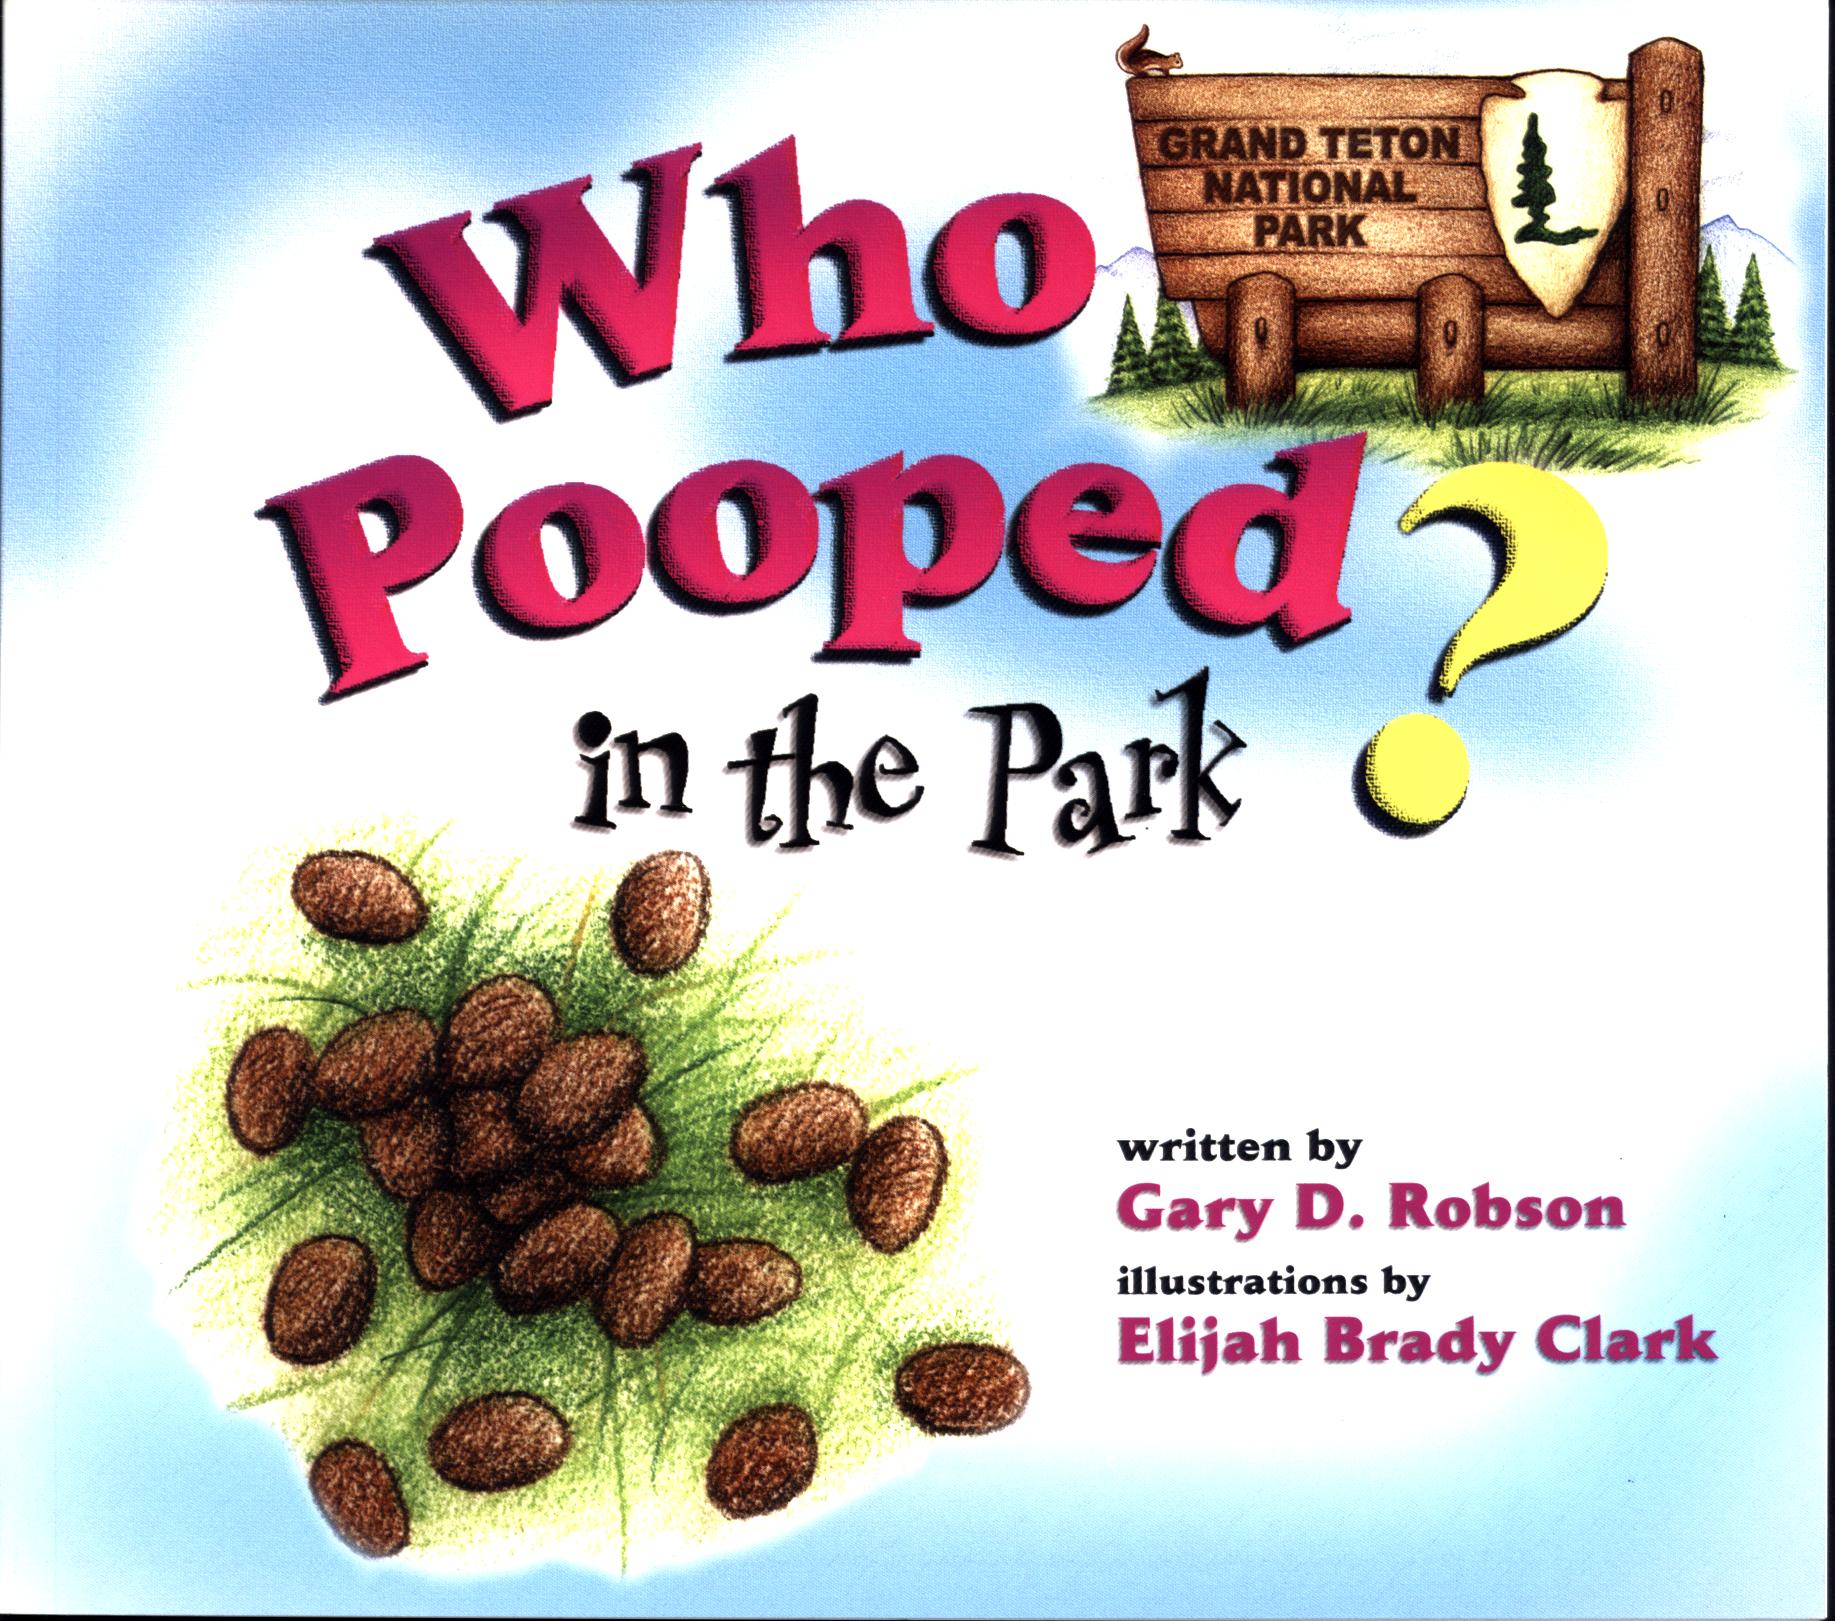 WHO POOPED IN THE PARK? Grand Teton National Park. 